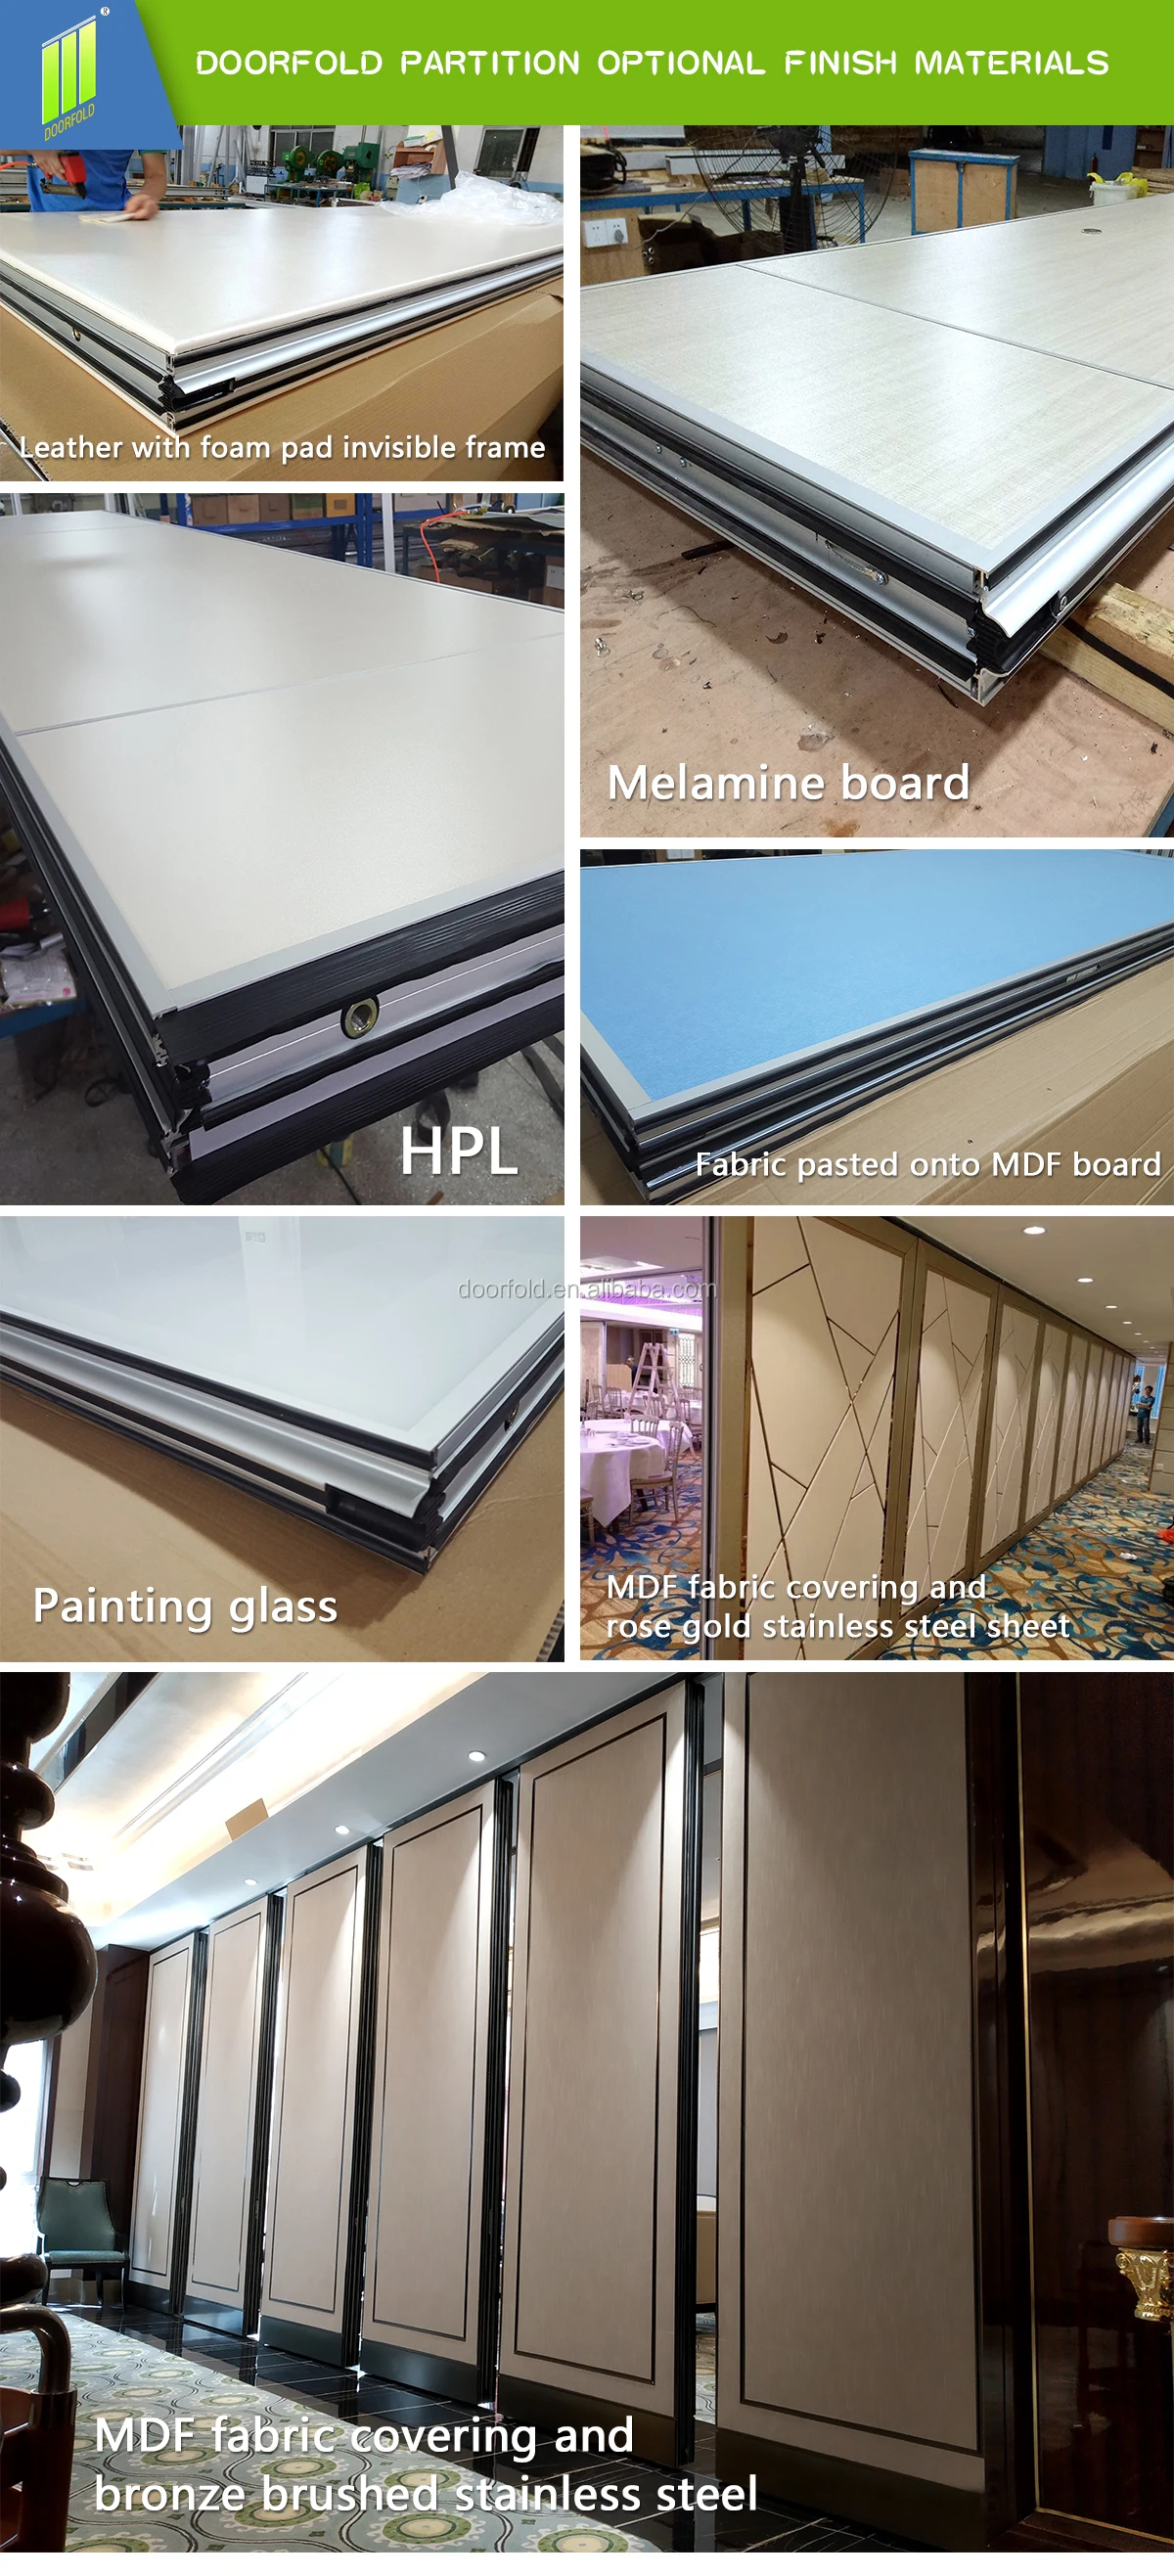 Doorfold hotel room divider banquet hall movable wall dividers banquet partition